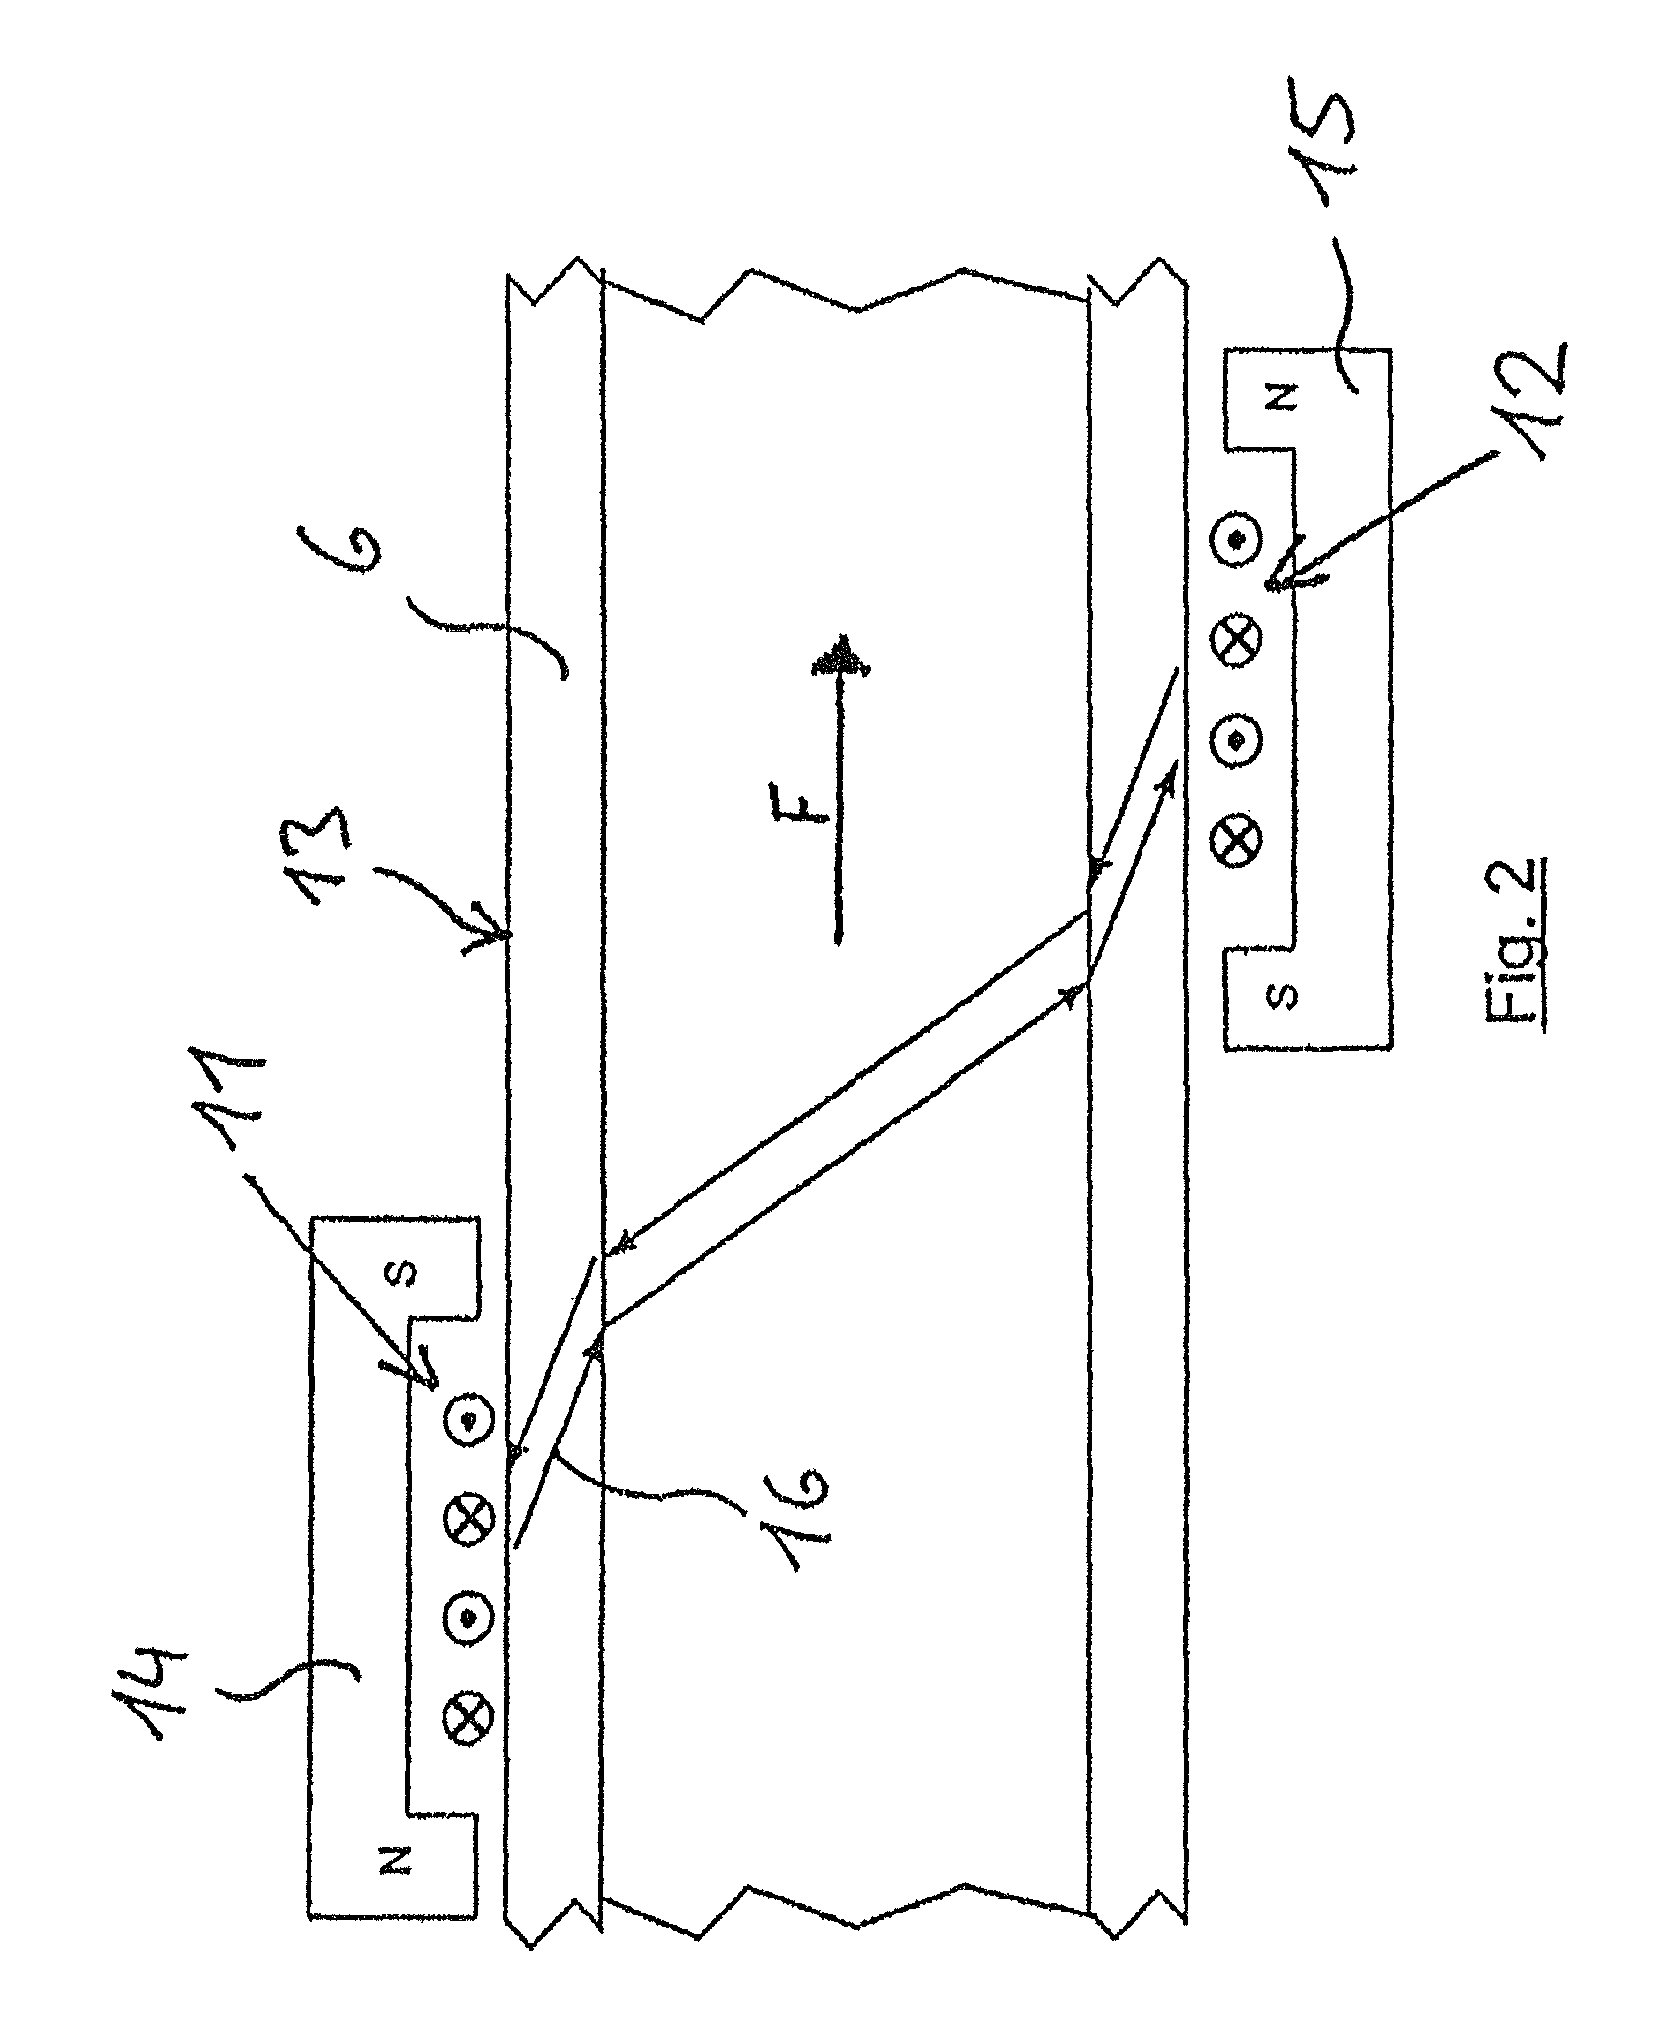 Acoustic flow rate meter having a high frequency induction coil mounted directly on the piping without an acoustic coupling